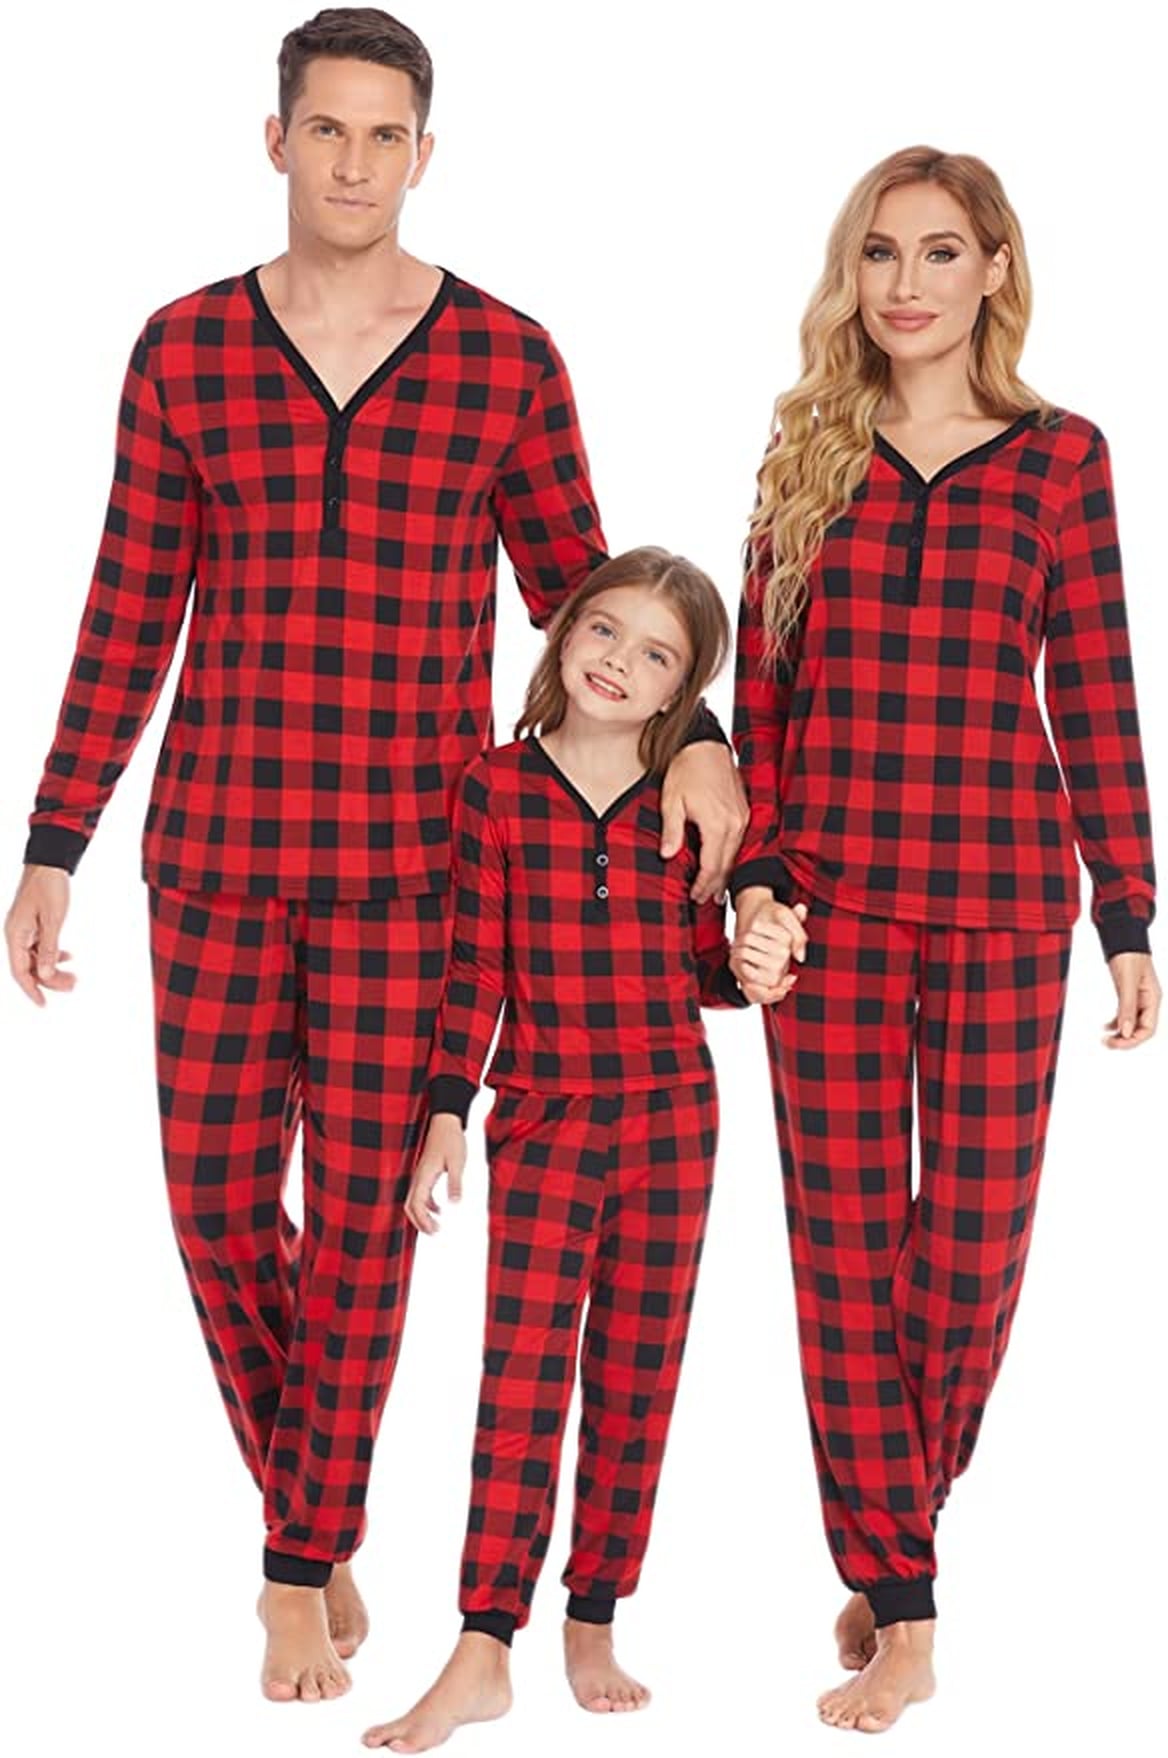 Matching Family Holiday Pajamas on Amazon For Cyber Monday | POPSUGAR ...